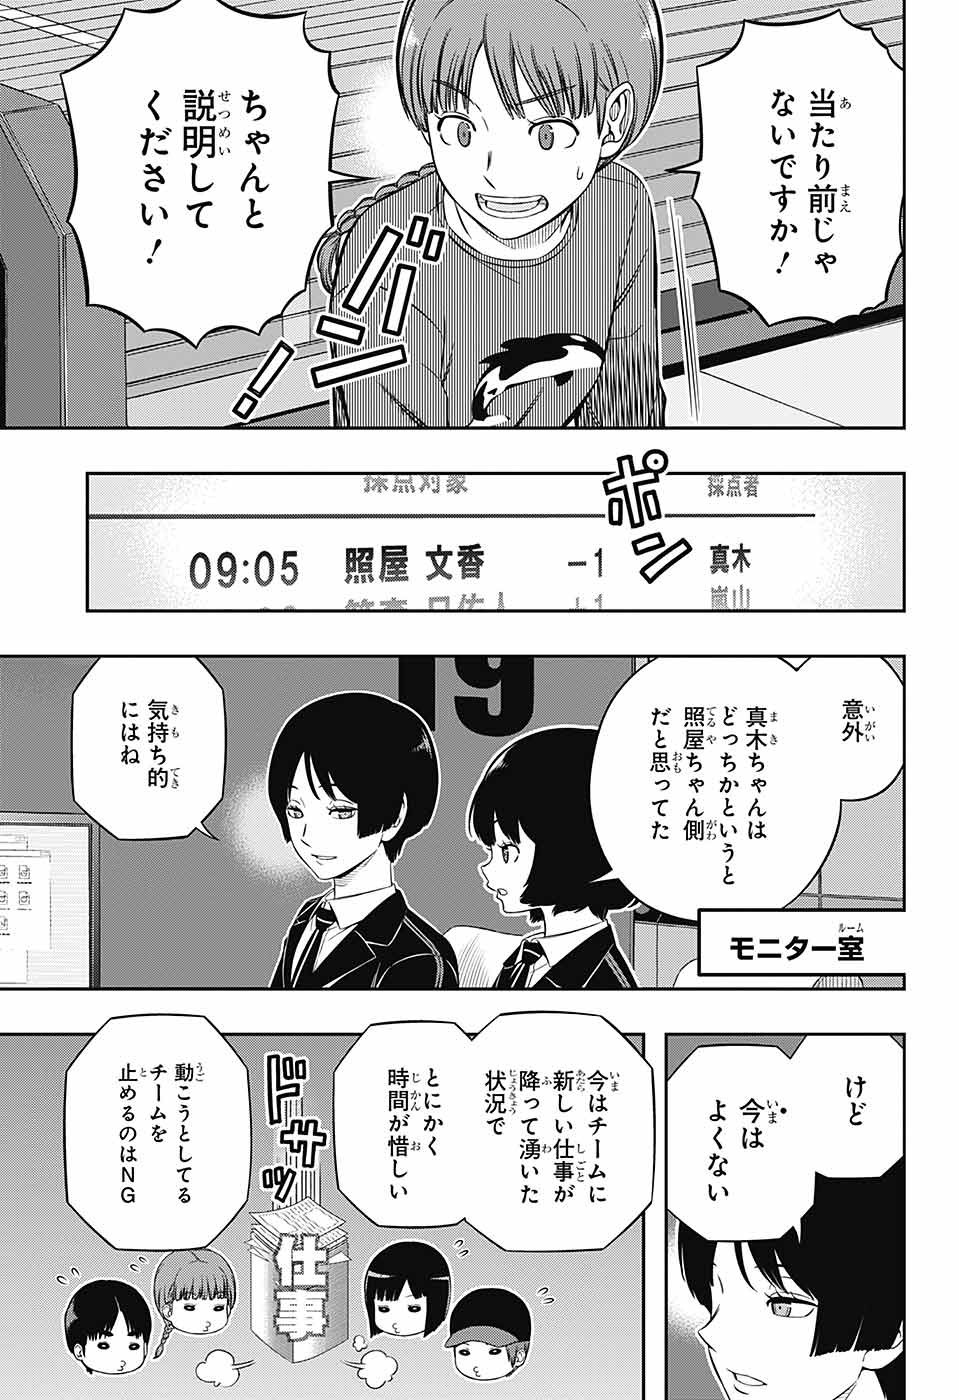 World Trigger - Chapter 228 - Page 3